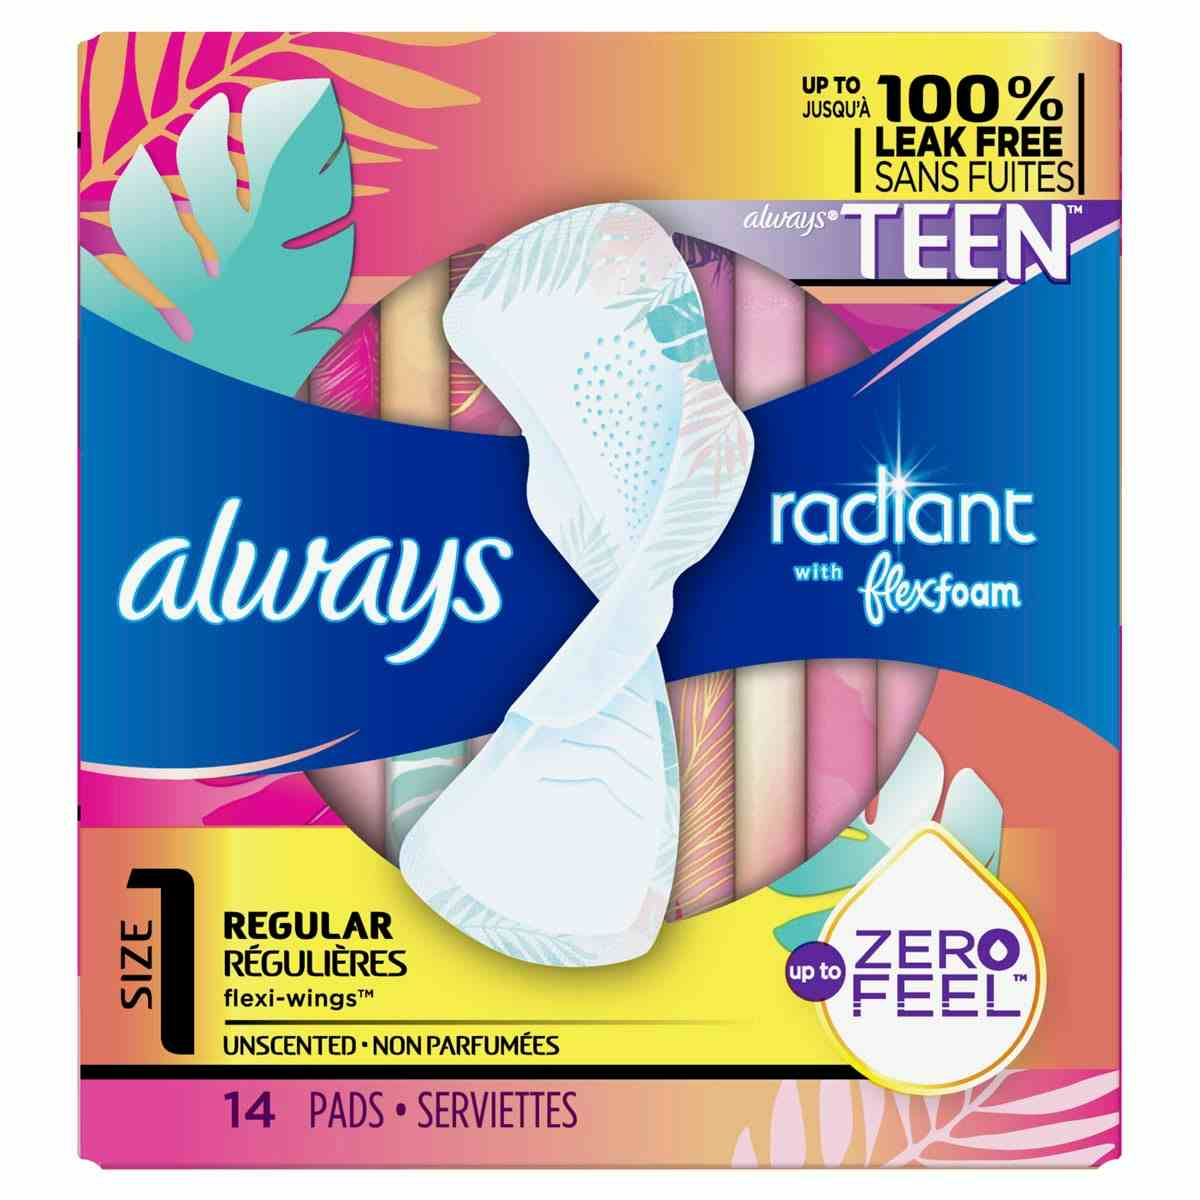 Always Radiant Teen Pads, Size 1, Unscented, Regular Absorbency, 80348173, Pack of 28